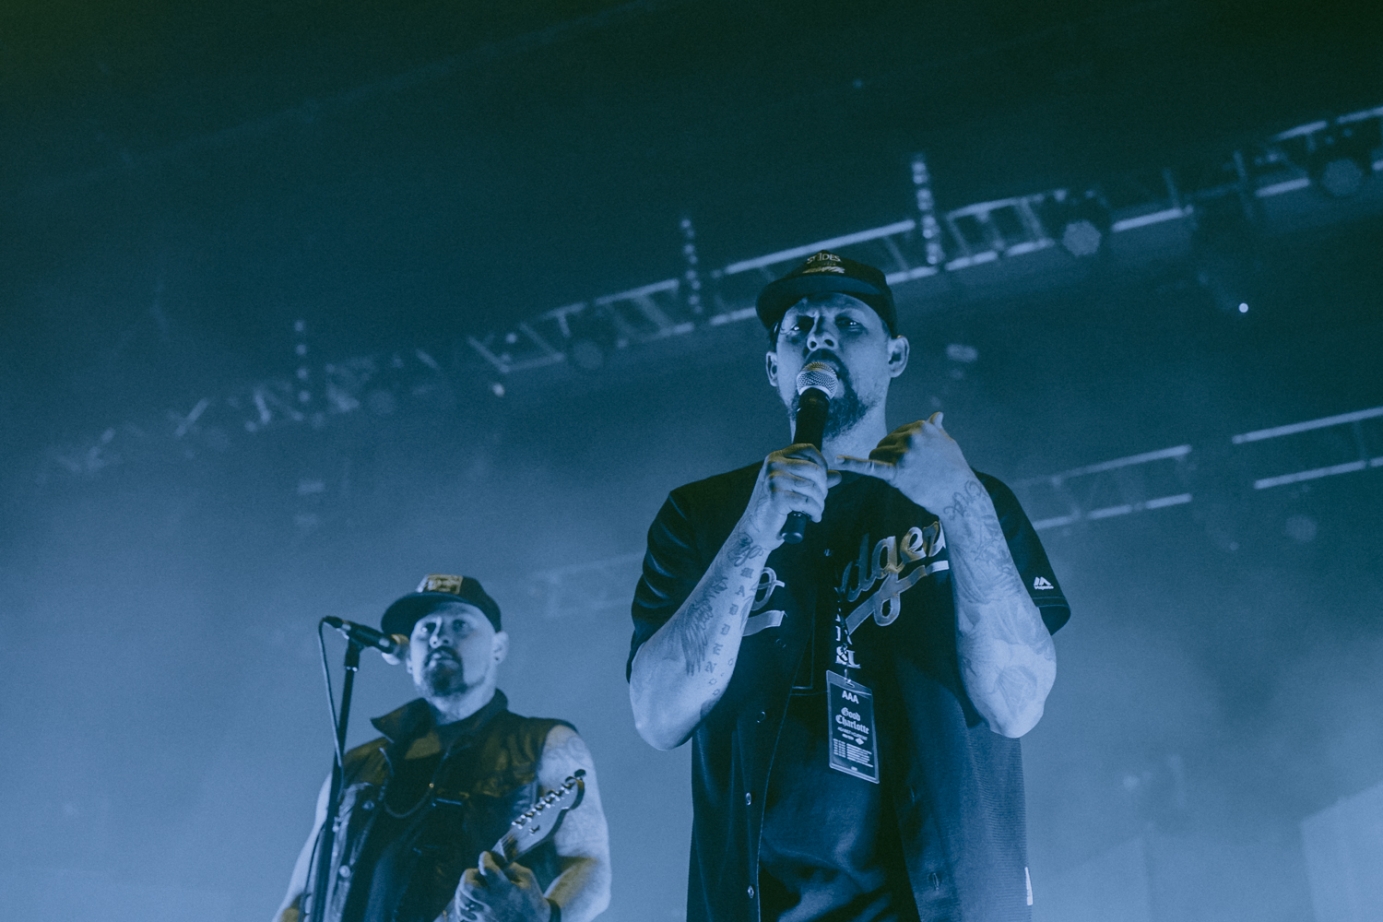 Live photography for Good Charlotte by chiaraceccaioni